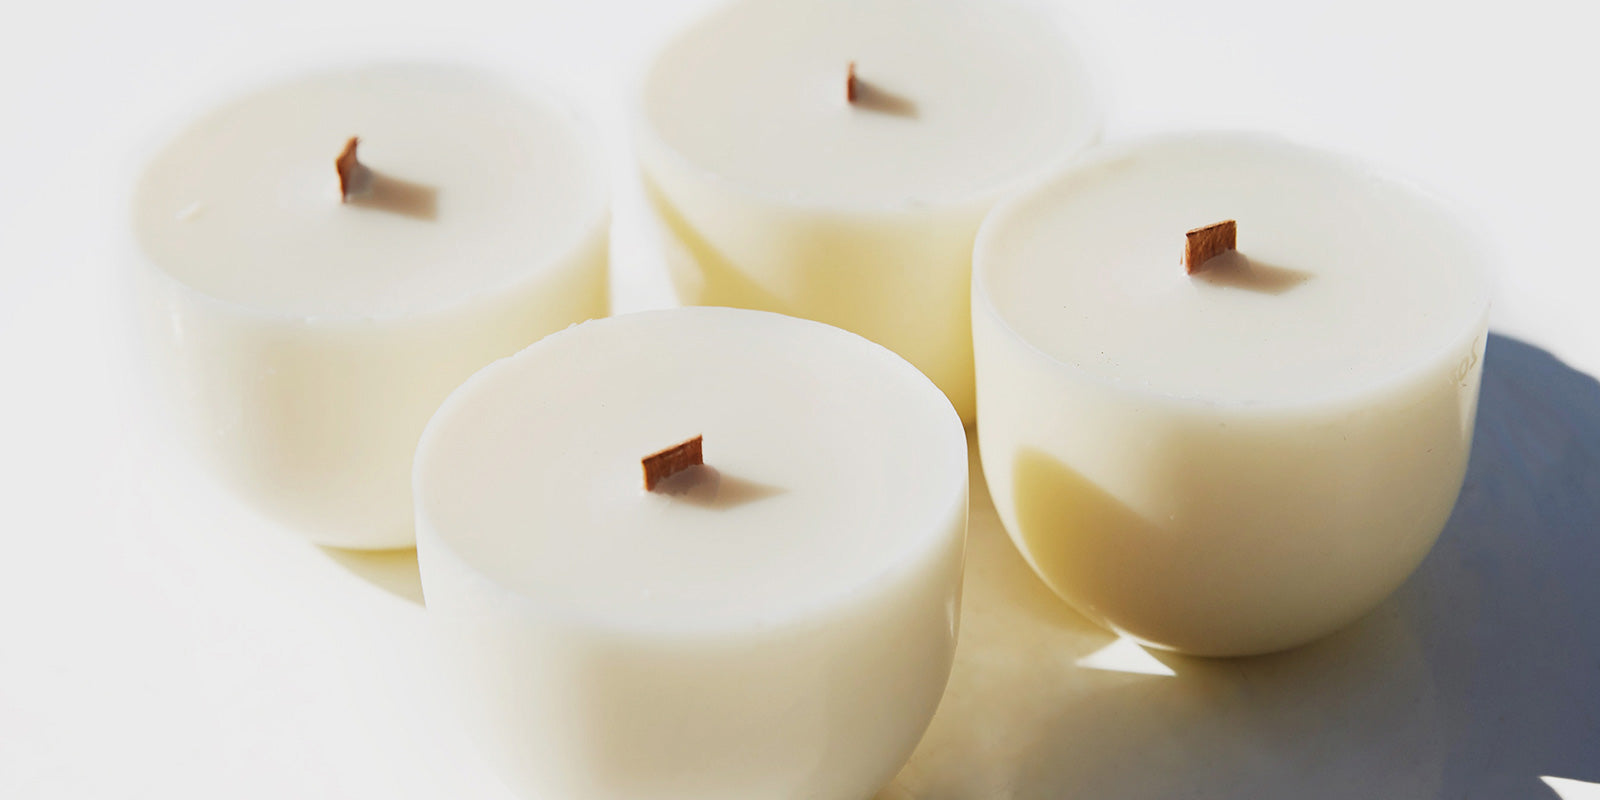 Wooden Wick Candles